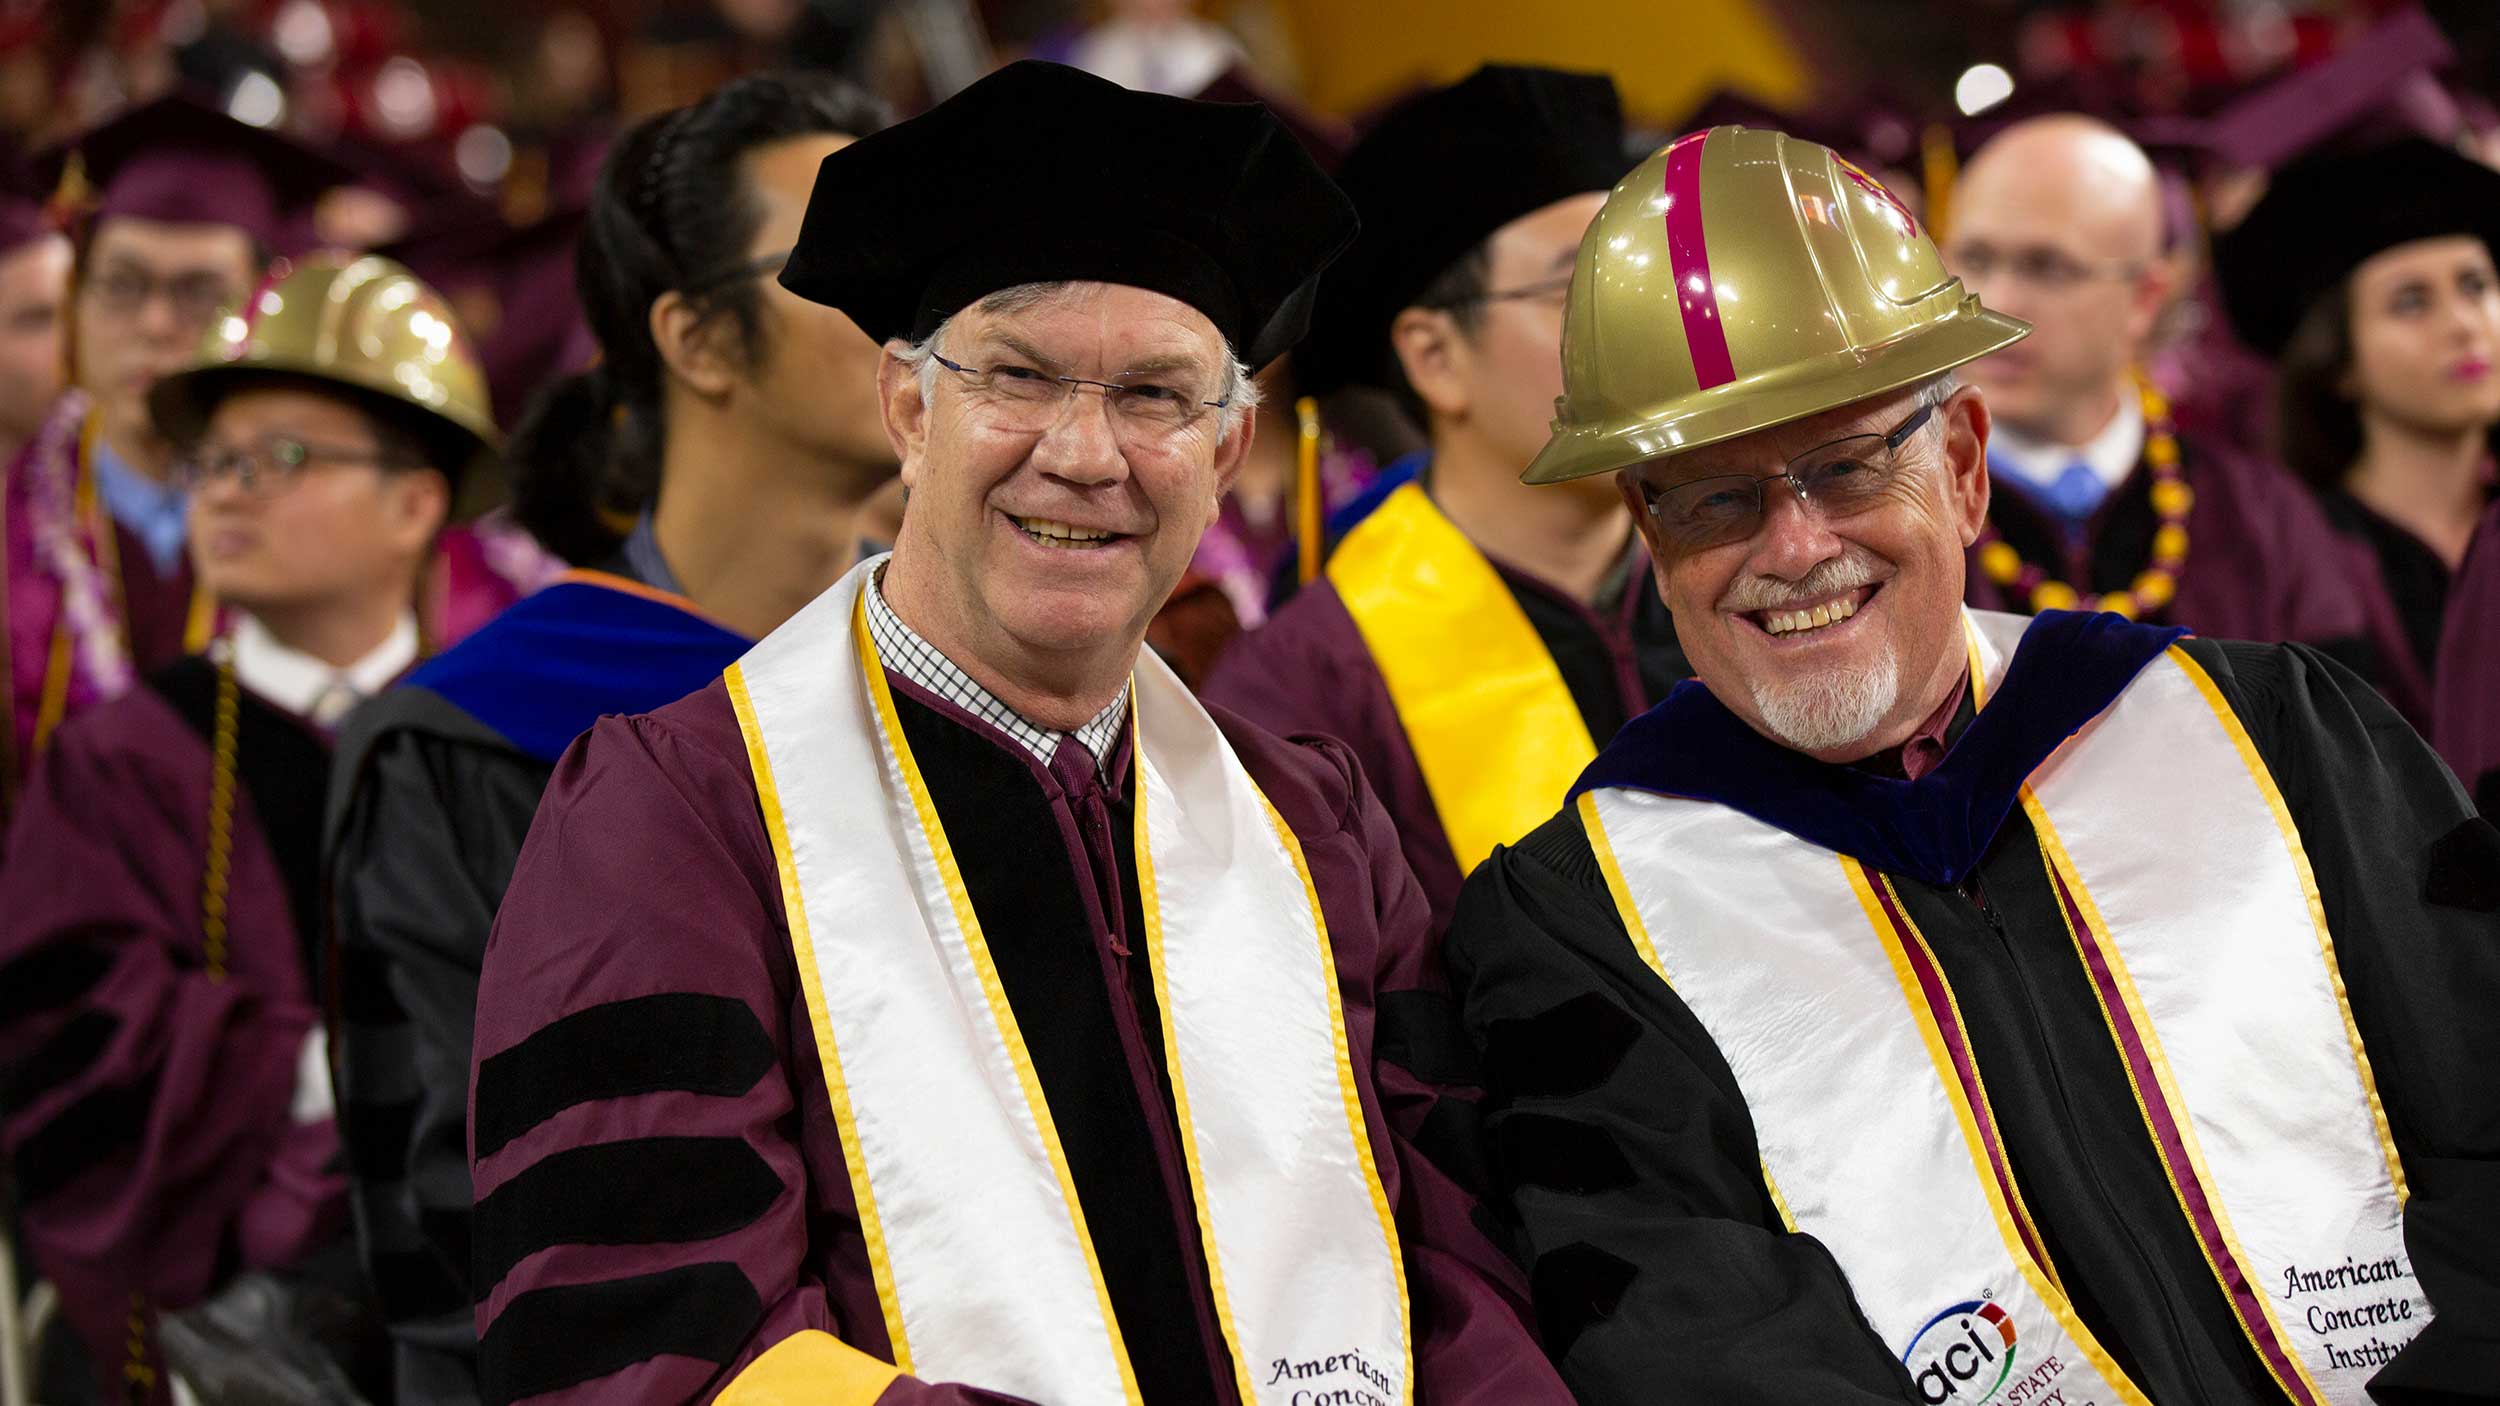 Richard Standage and Jim Ernzen smile for the camera at Convocation, dressed in their full regalia